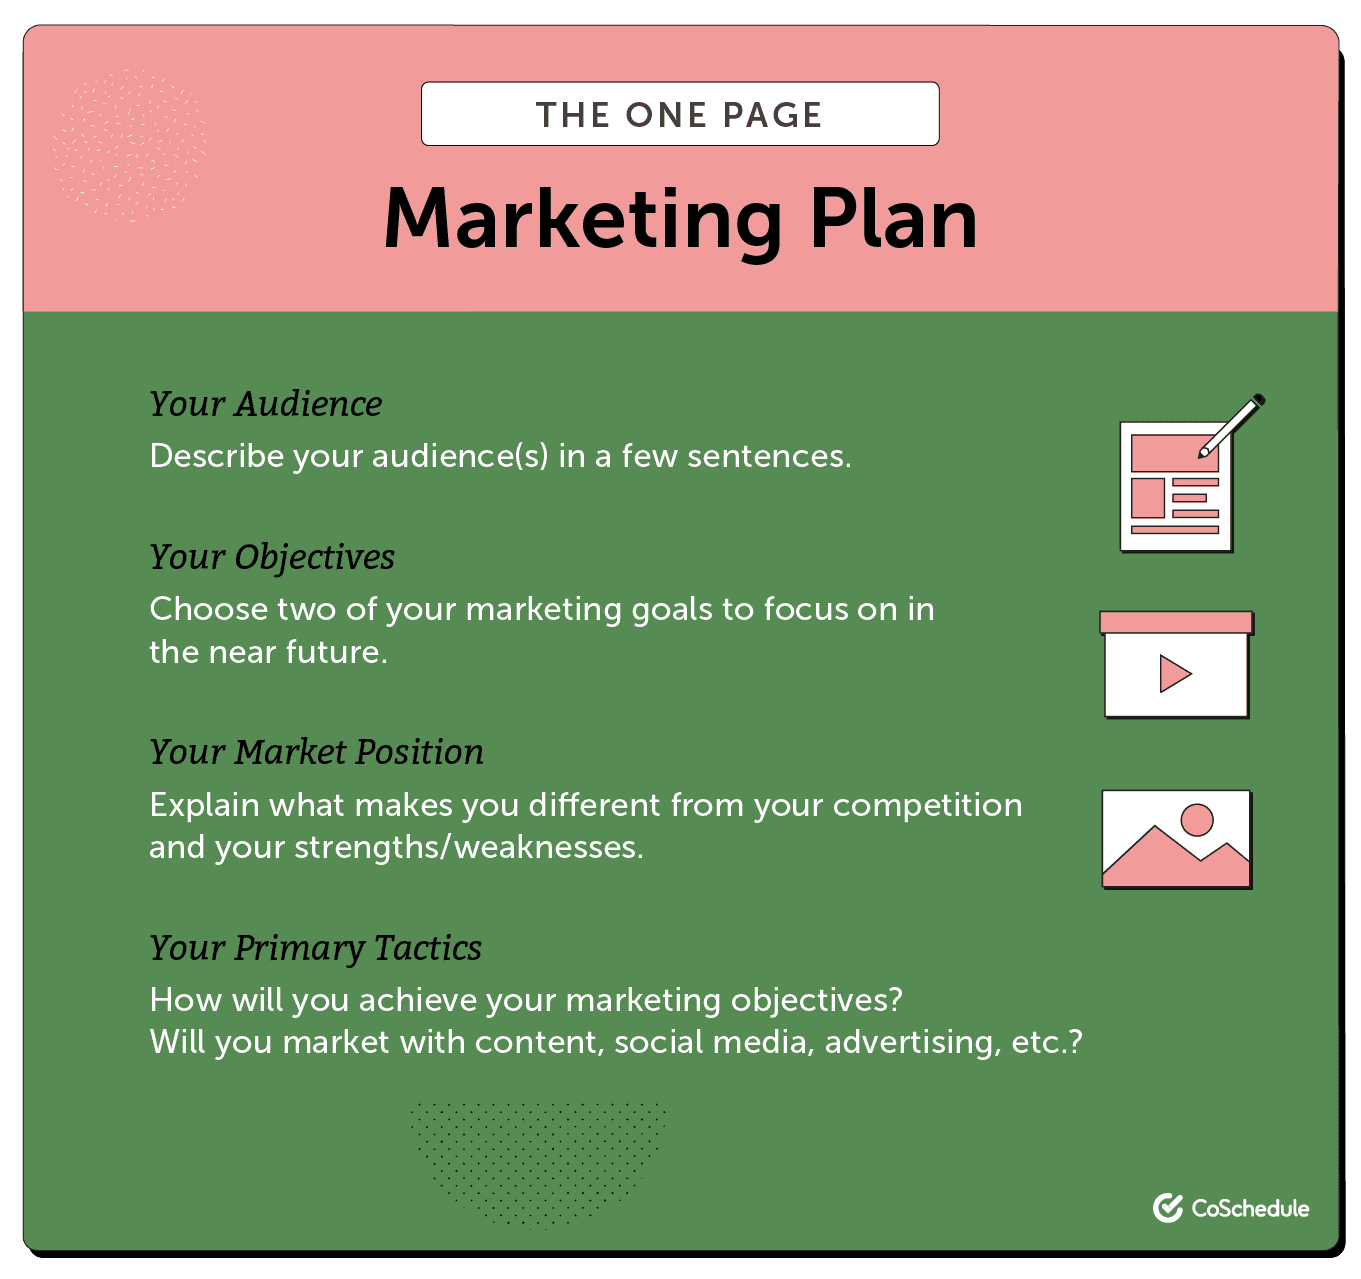 The one page marketing plan